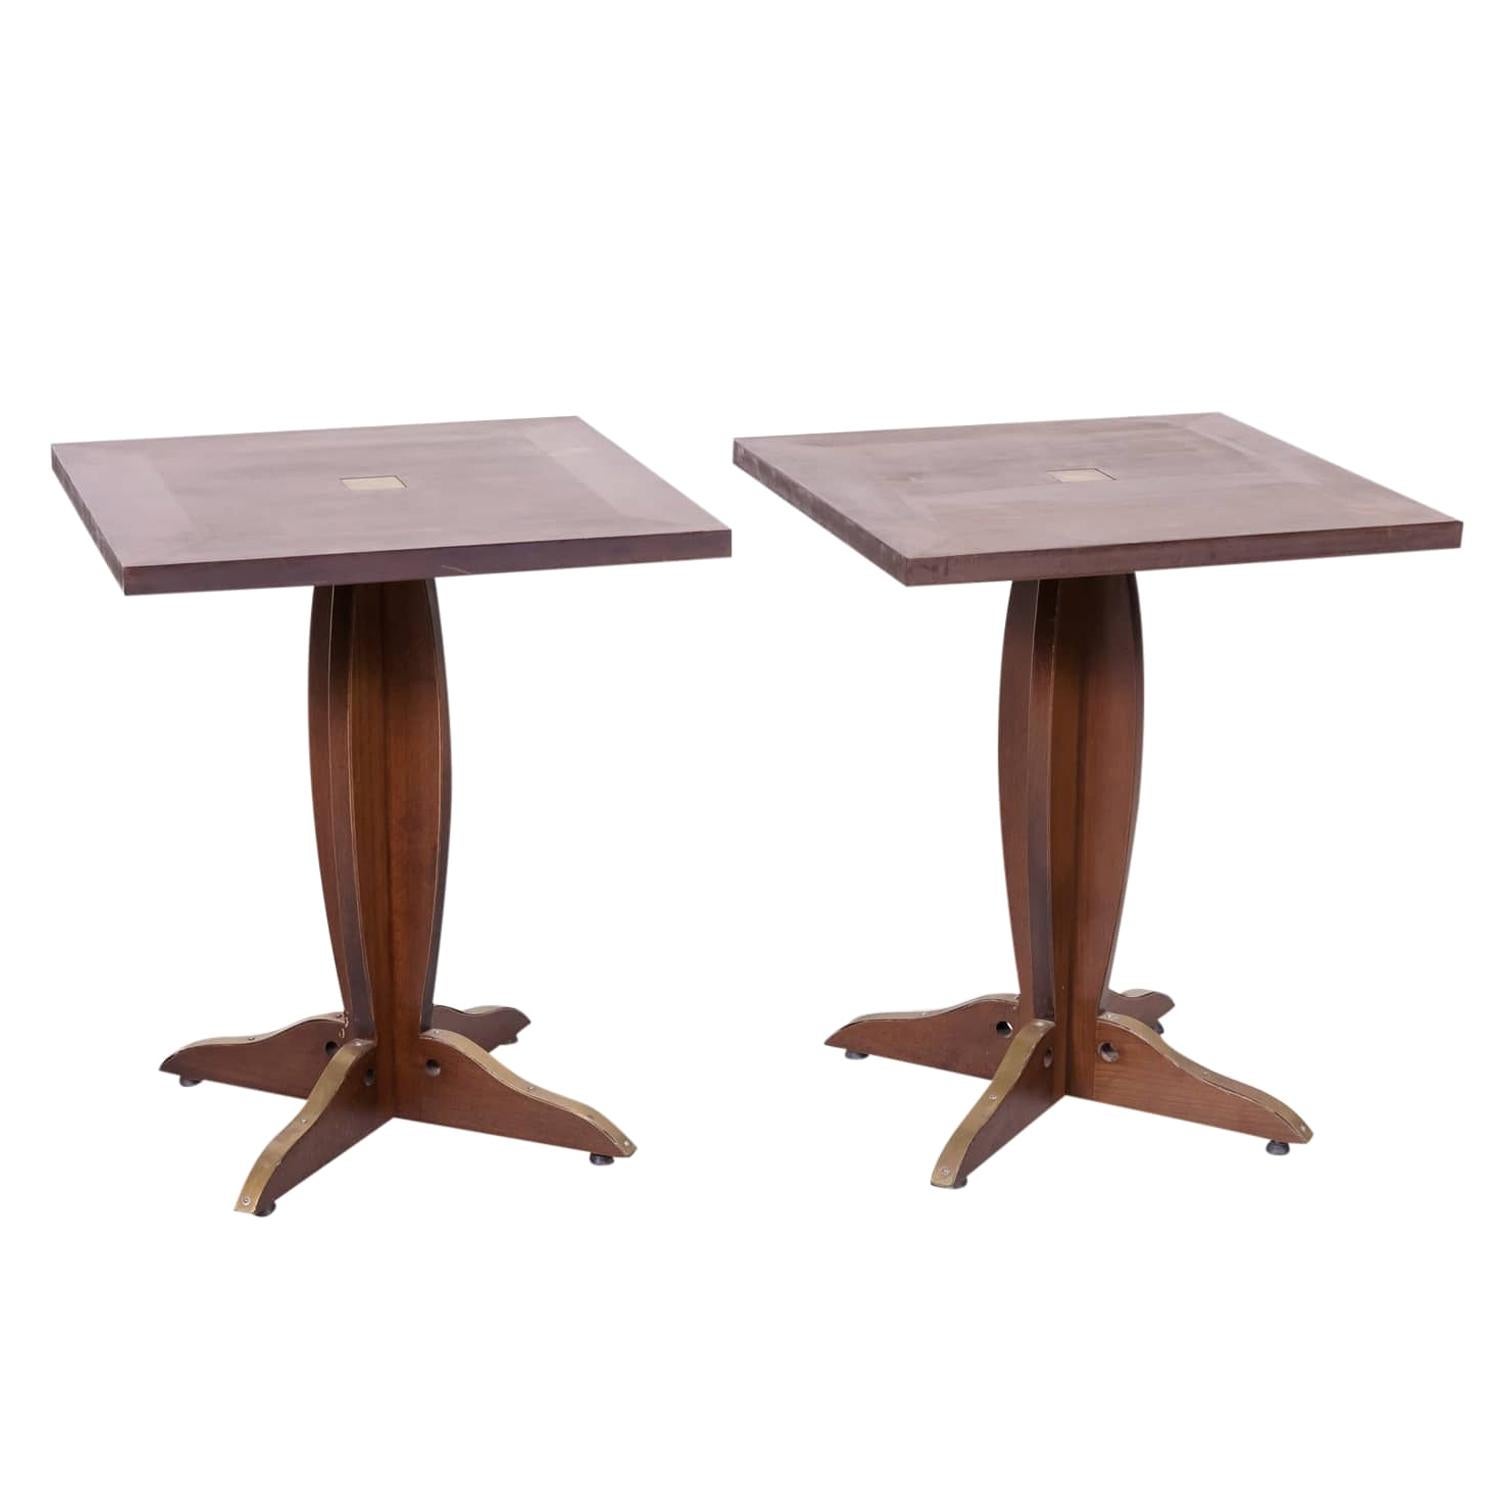 Pair of Solid Walnut and Brass French Art Deco Period Square Bistro Tables